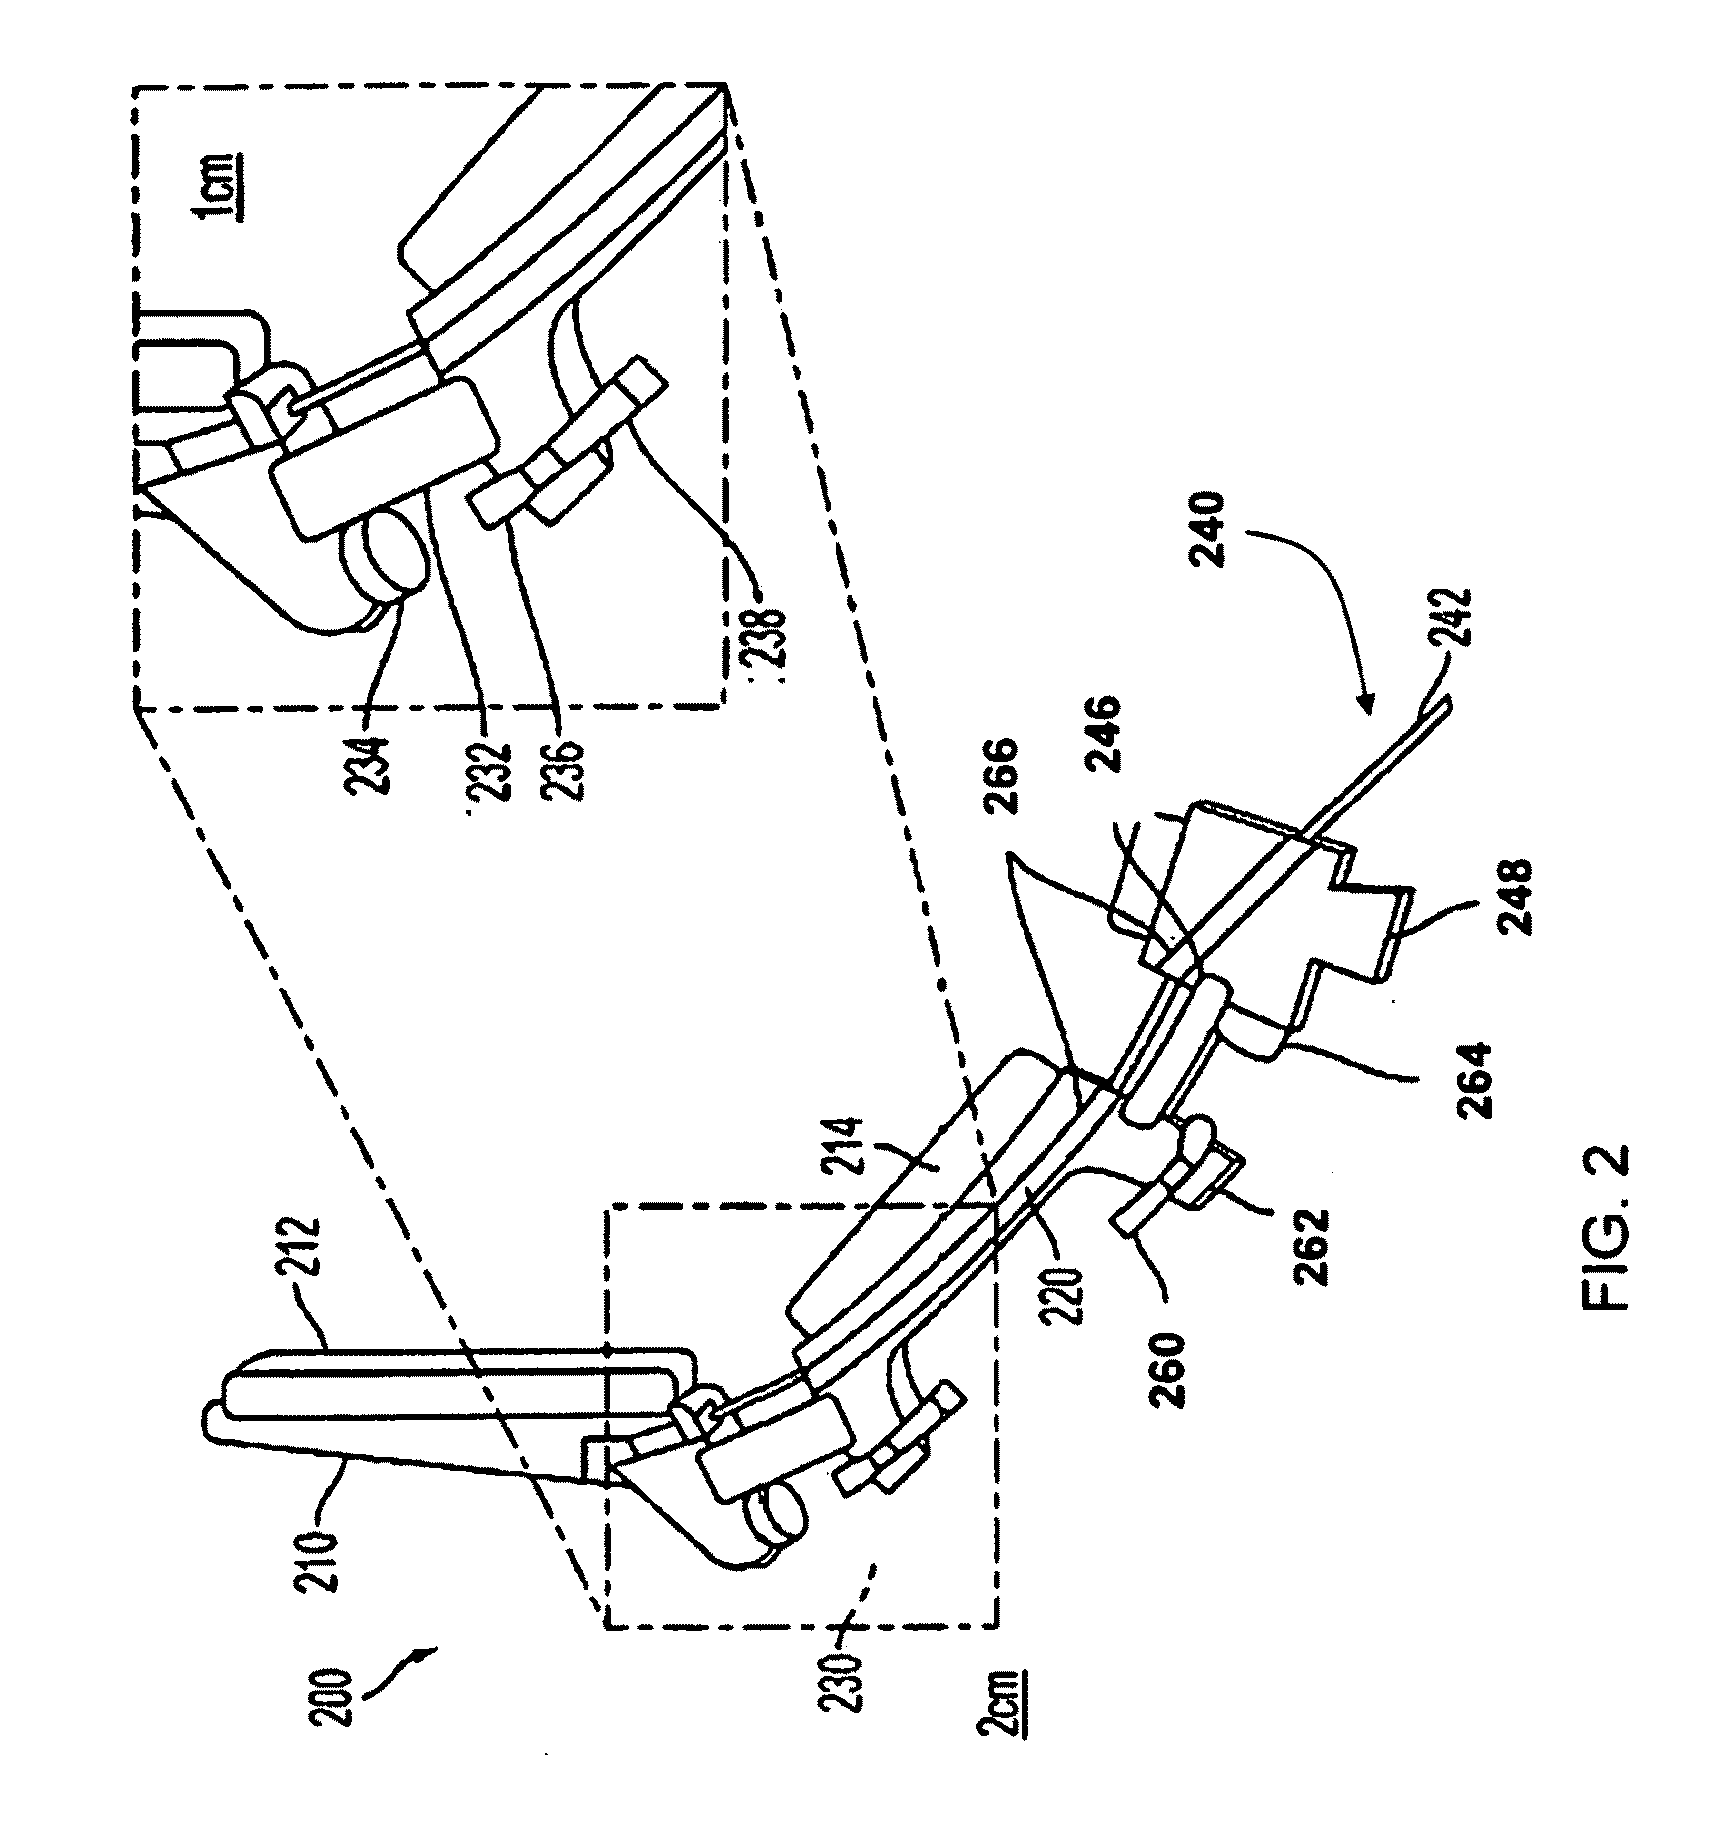 Robust Compliant Adaptive Grasper and Method of Manufacturing Same